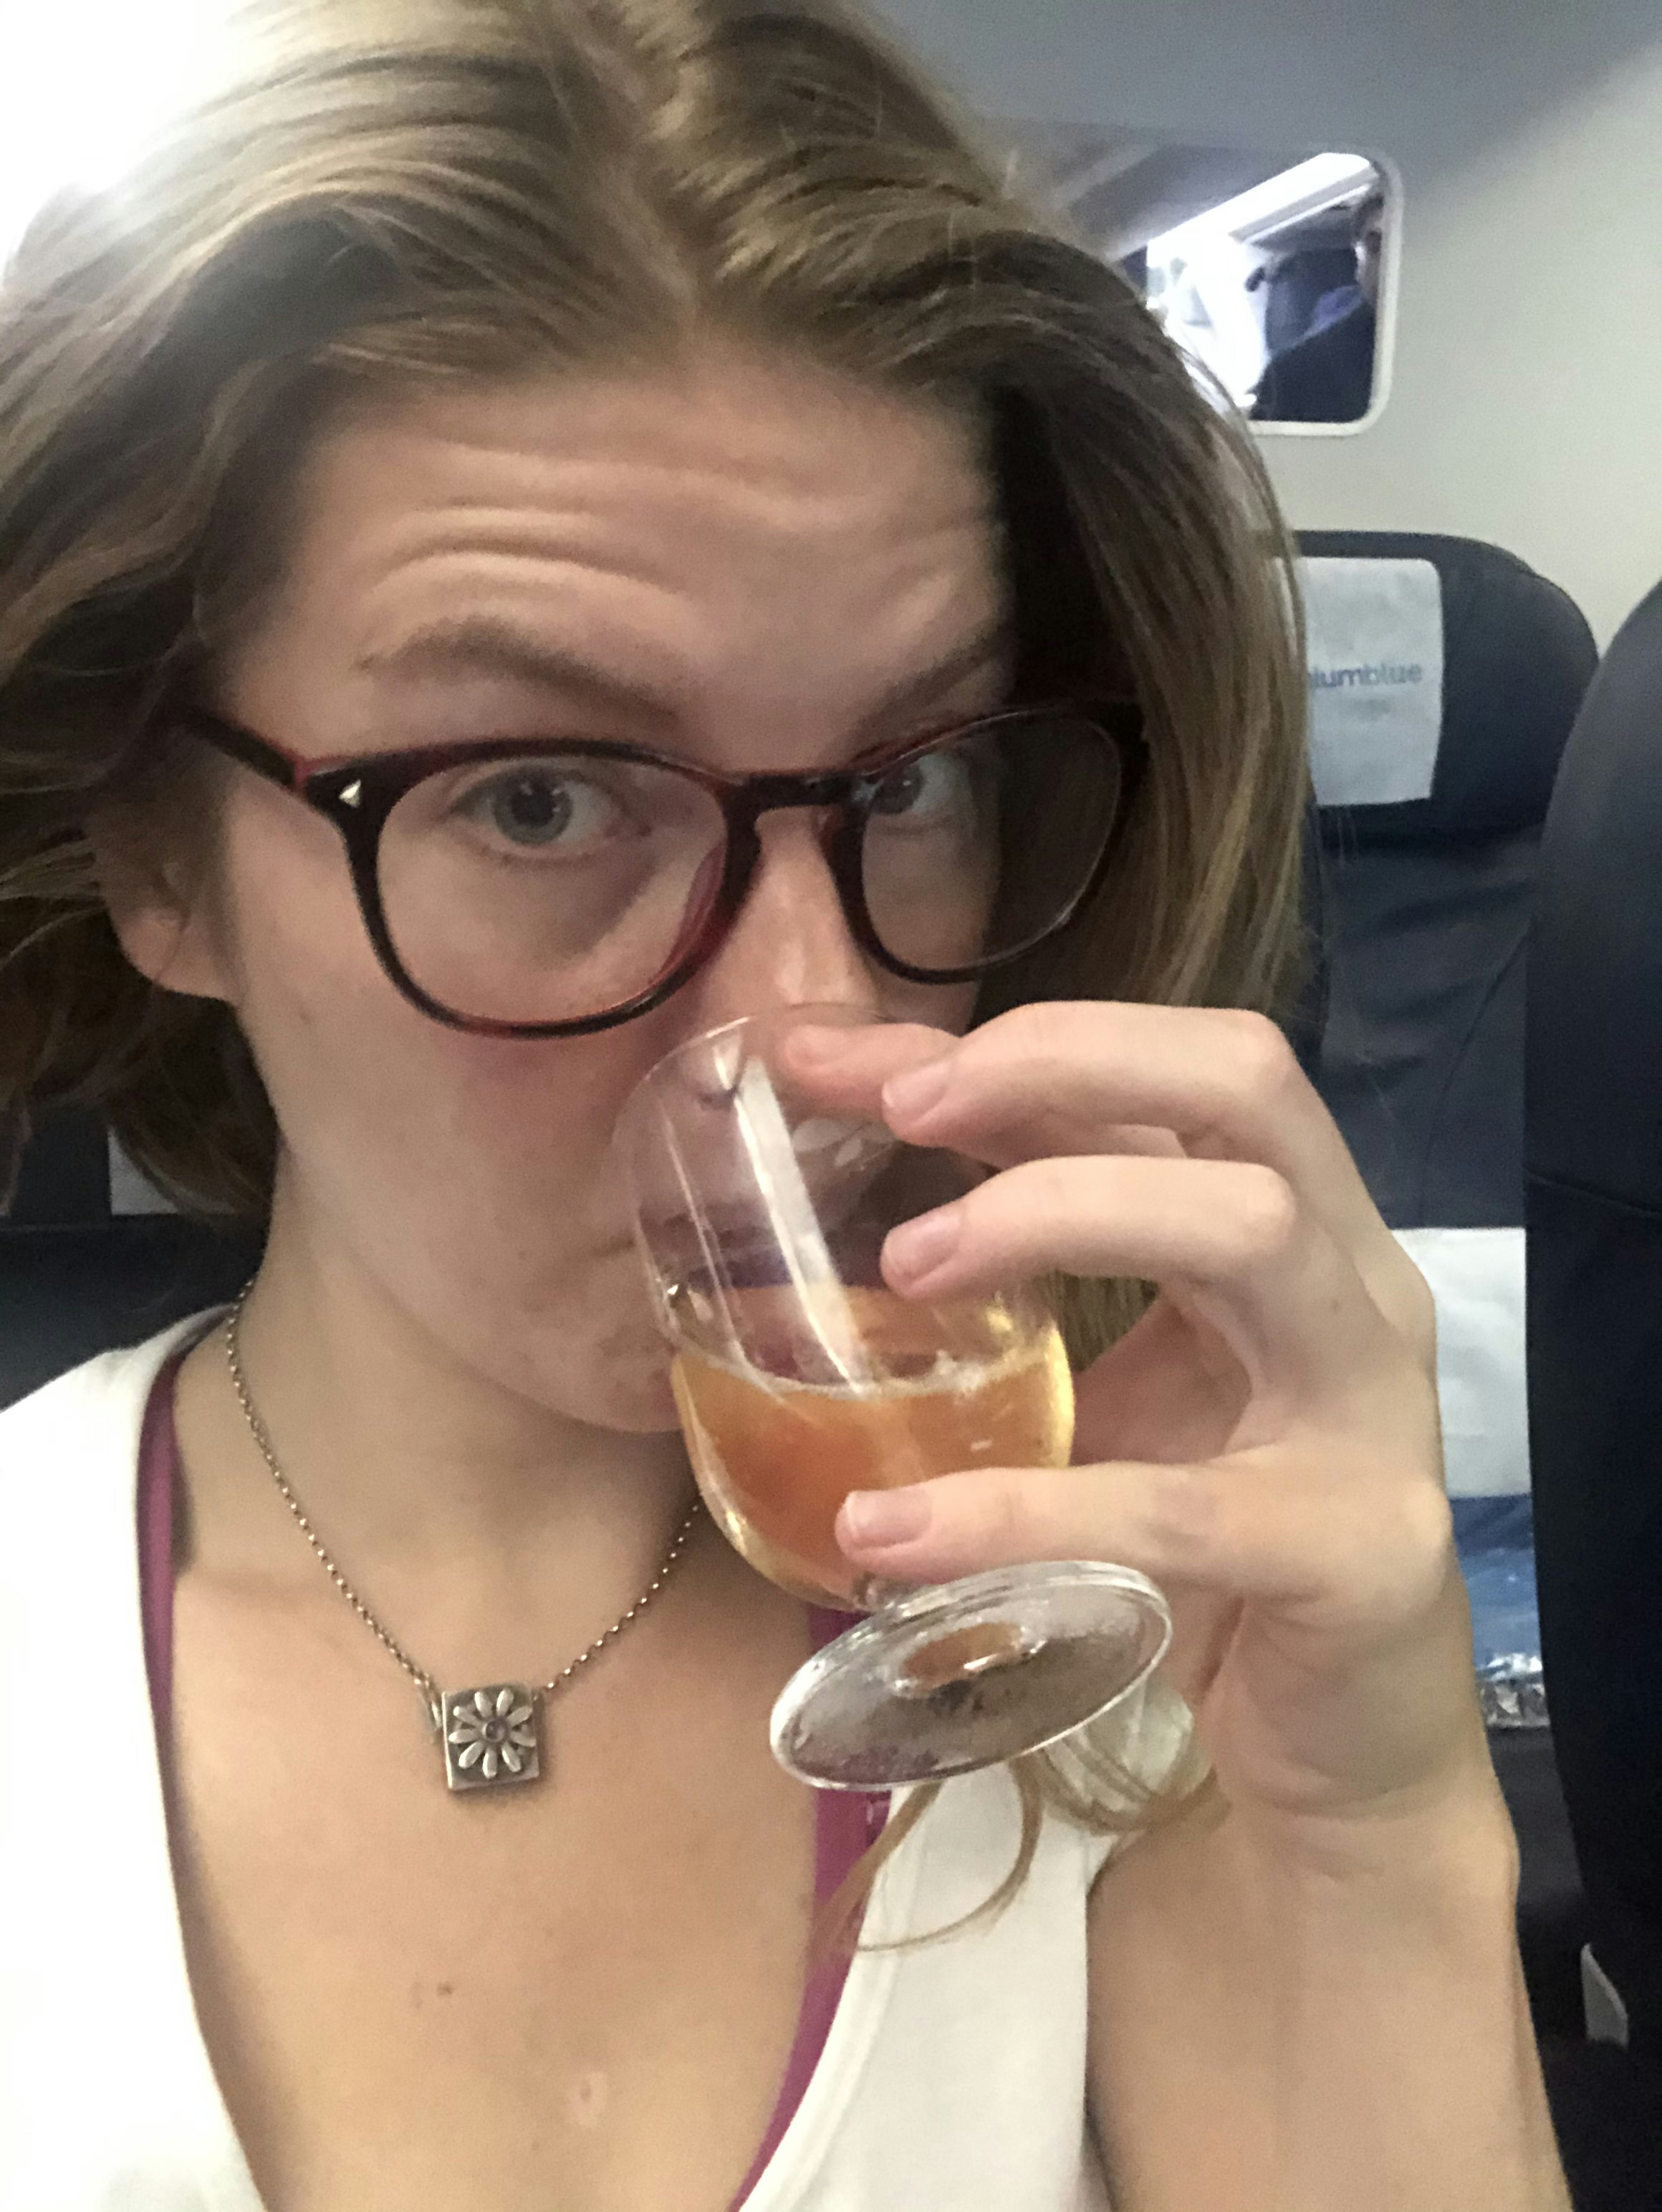 A woman sips a glass of wine on a plane